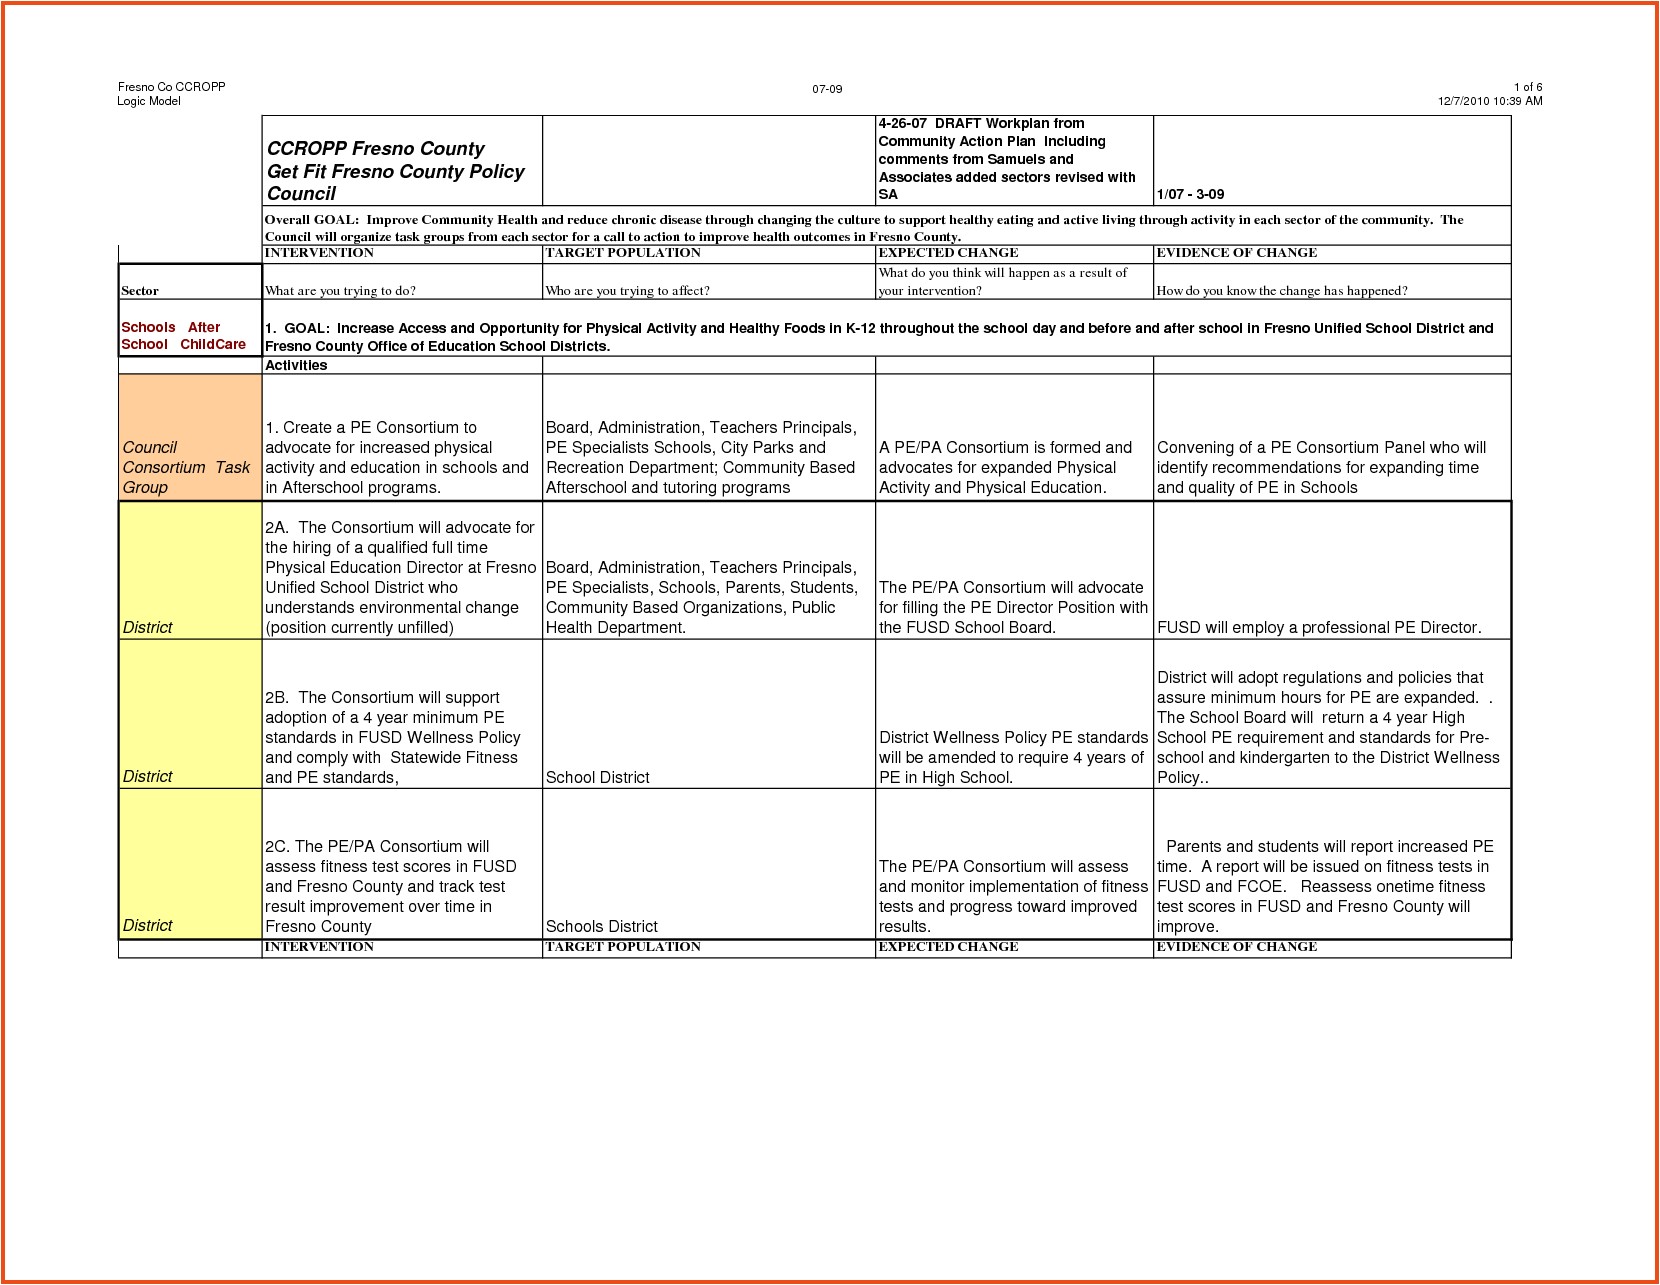 business continuity plan template free download